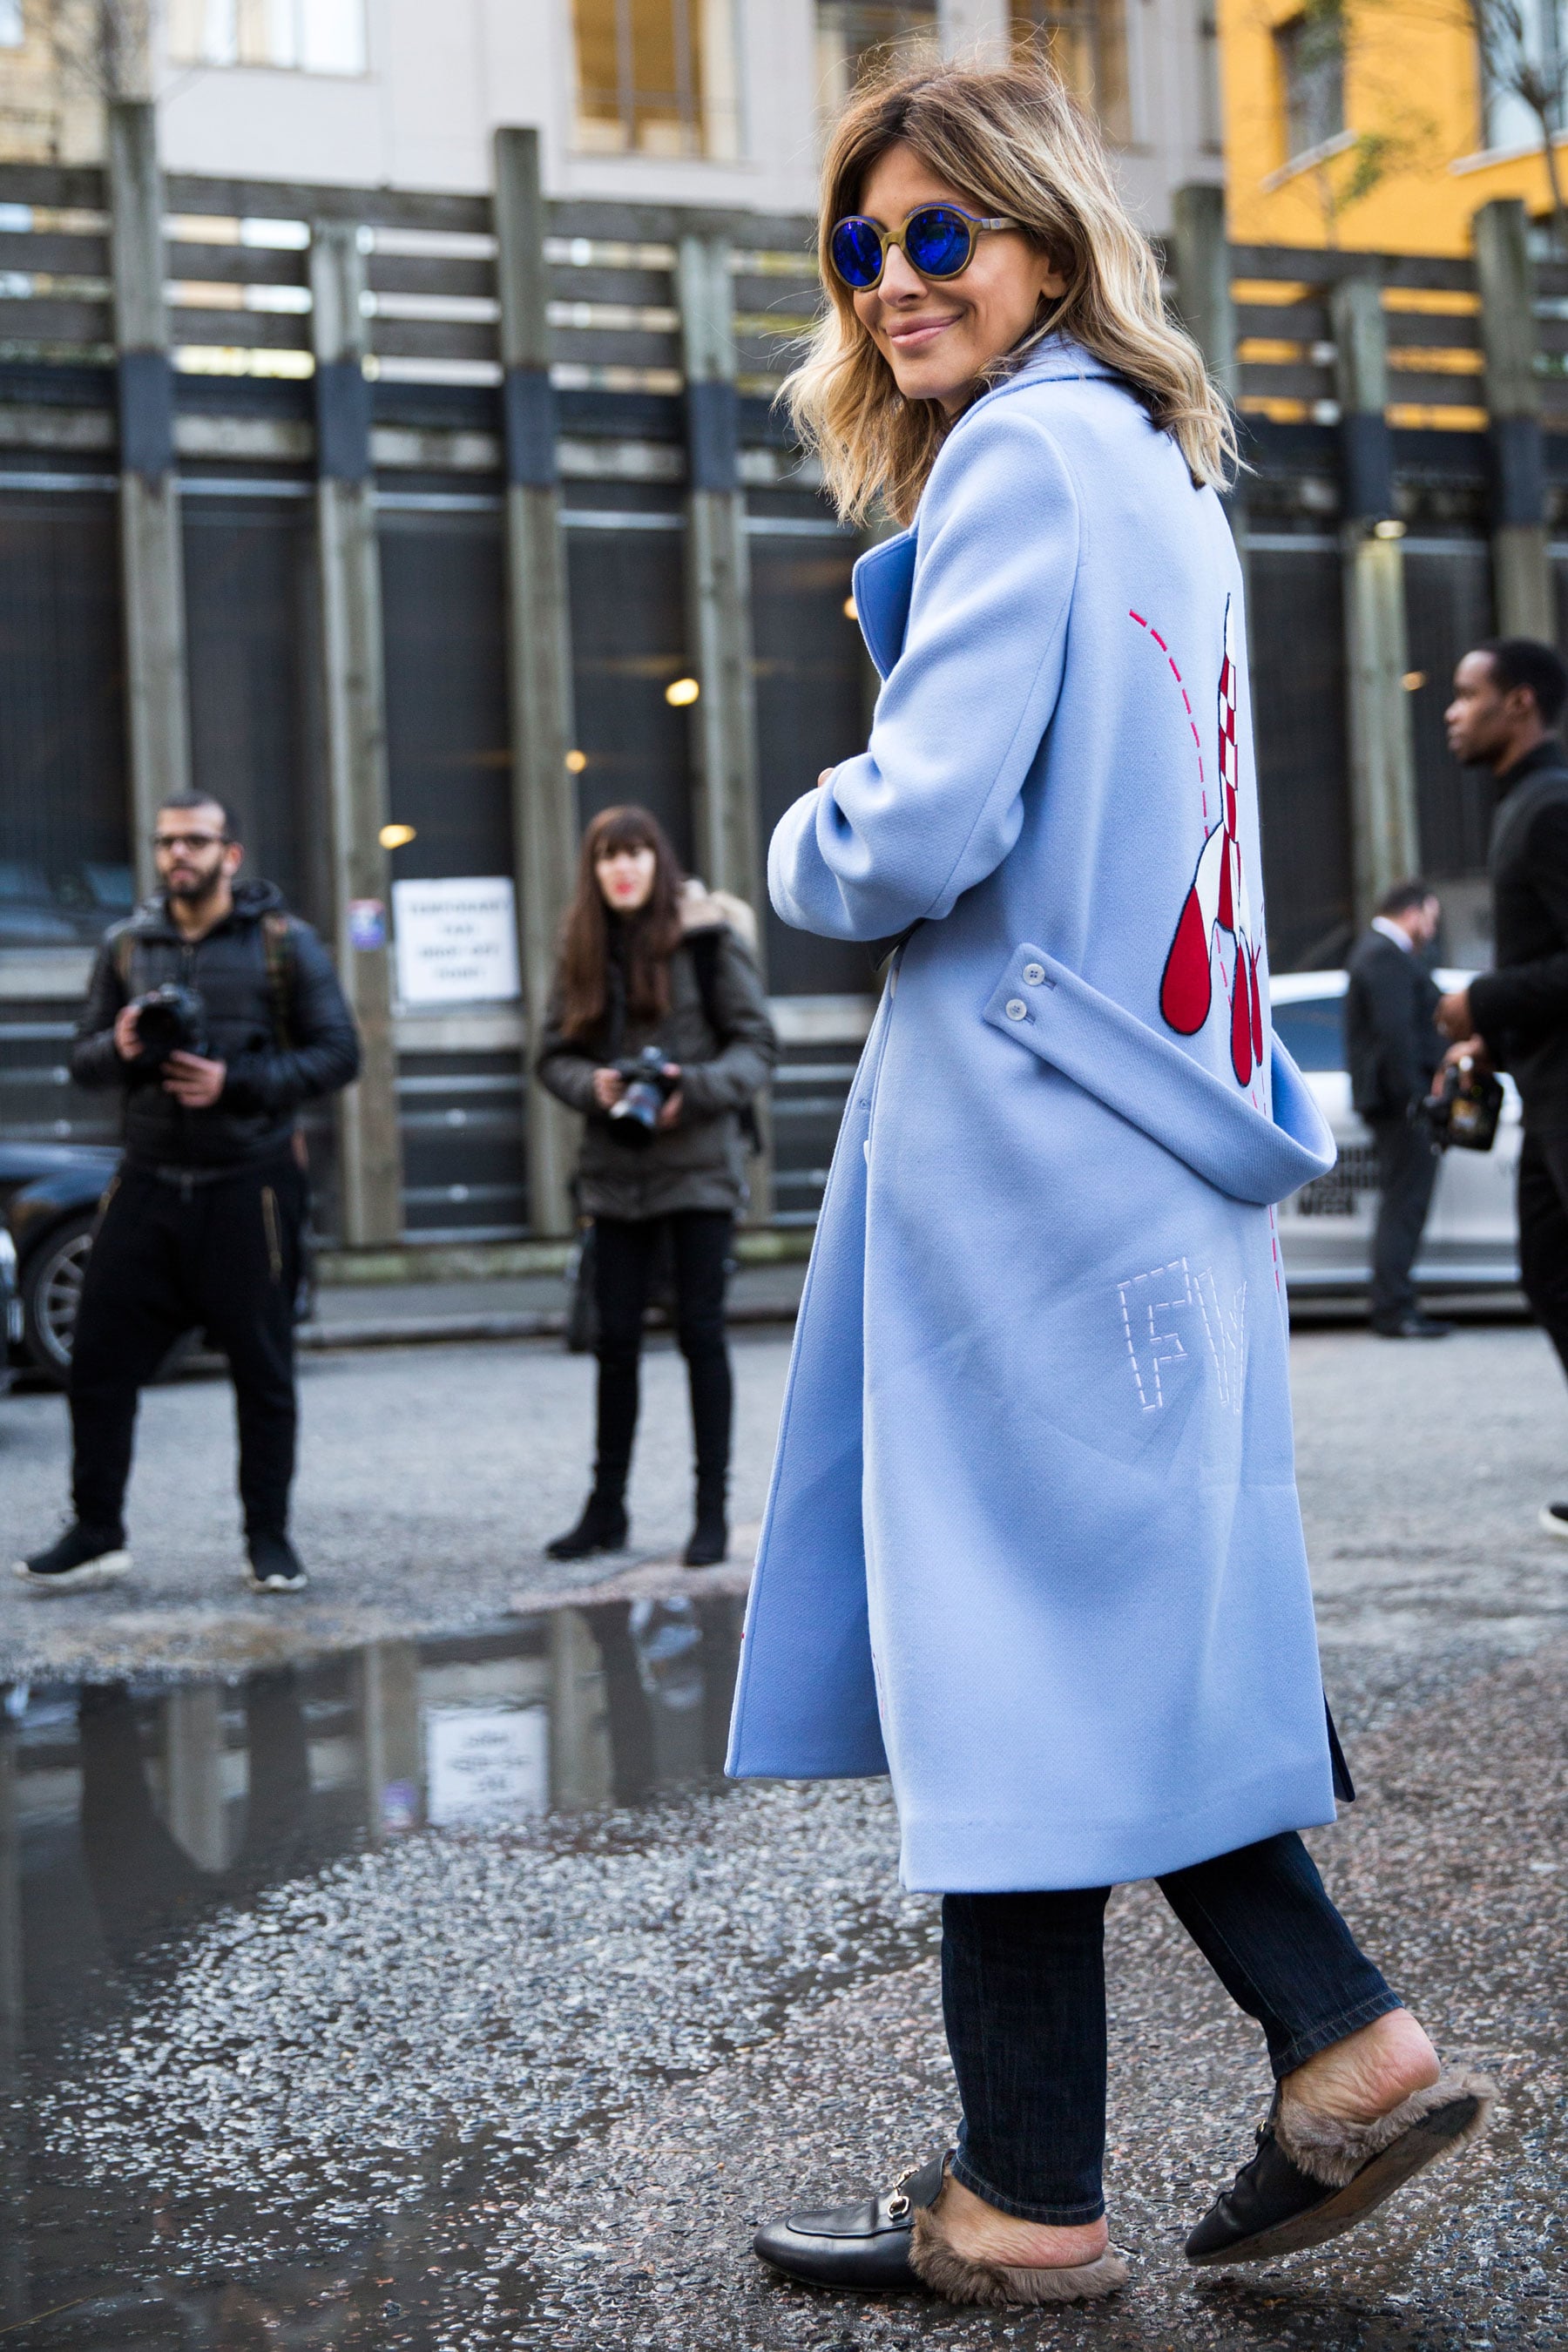 How To Wear A Trench Coat Like The Fashion Crowd